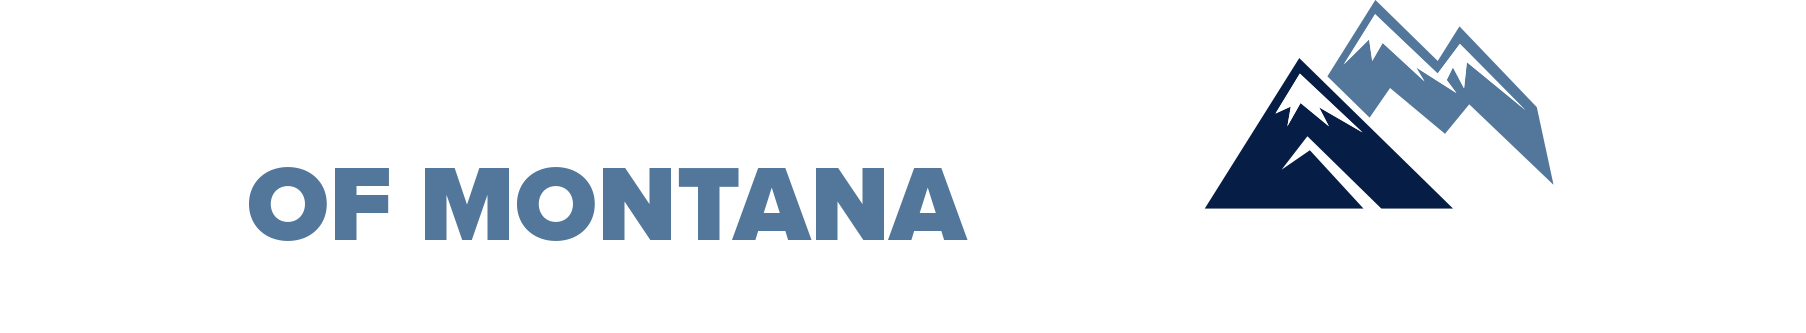 Affordable Movers of Montana